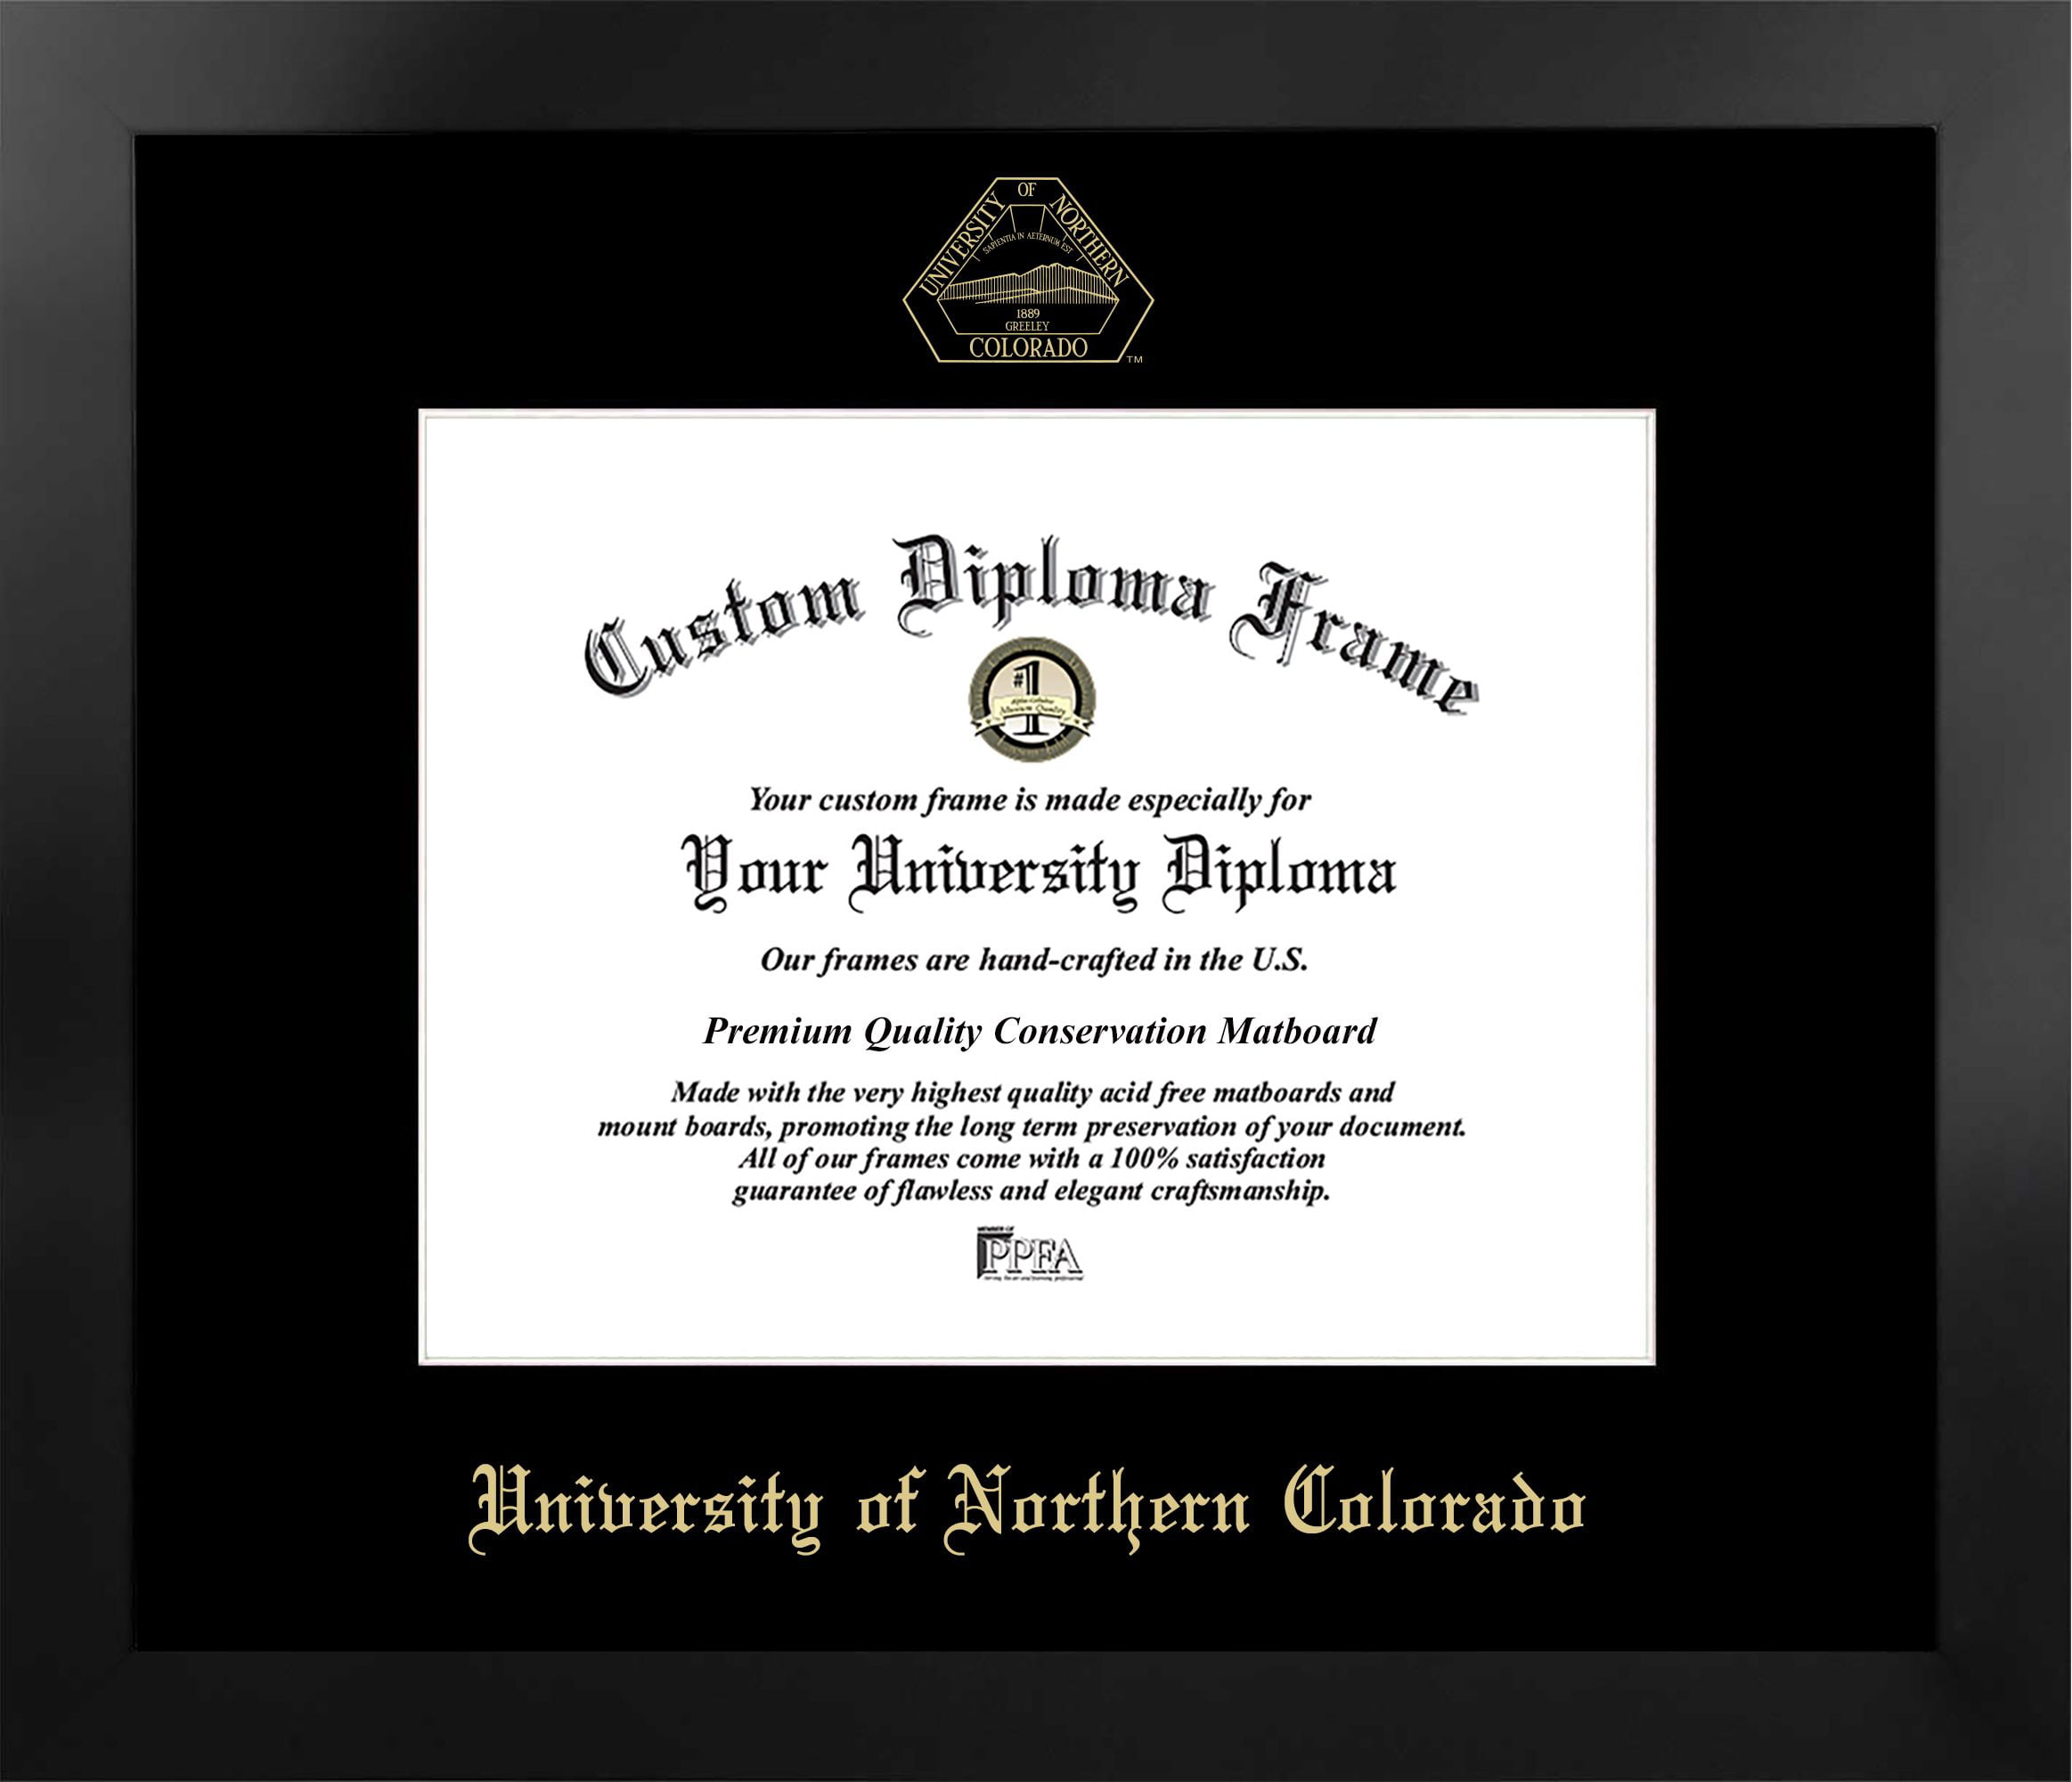 CO996MBSGED-108 8 x 10 in. University of Northern Colorado Single Embossed Diploma Frame with Bonus  Lithograph, Manhattan Black & Mat Gold -  Campus Images